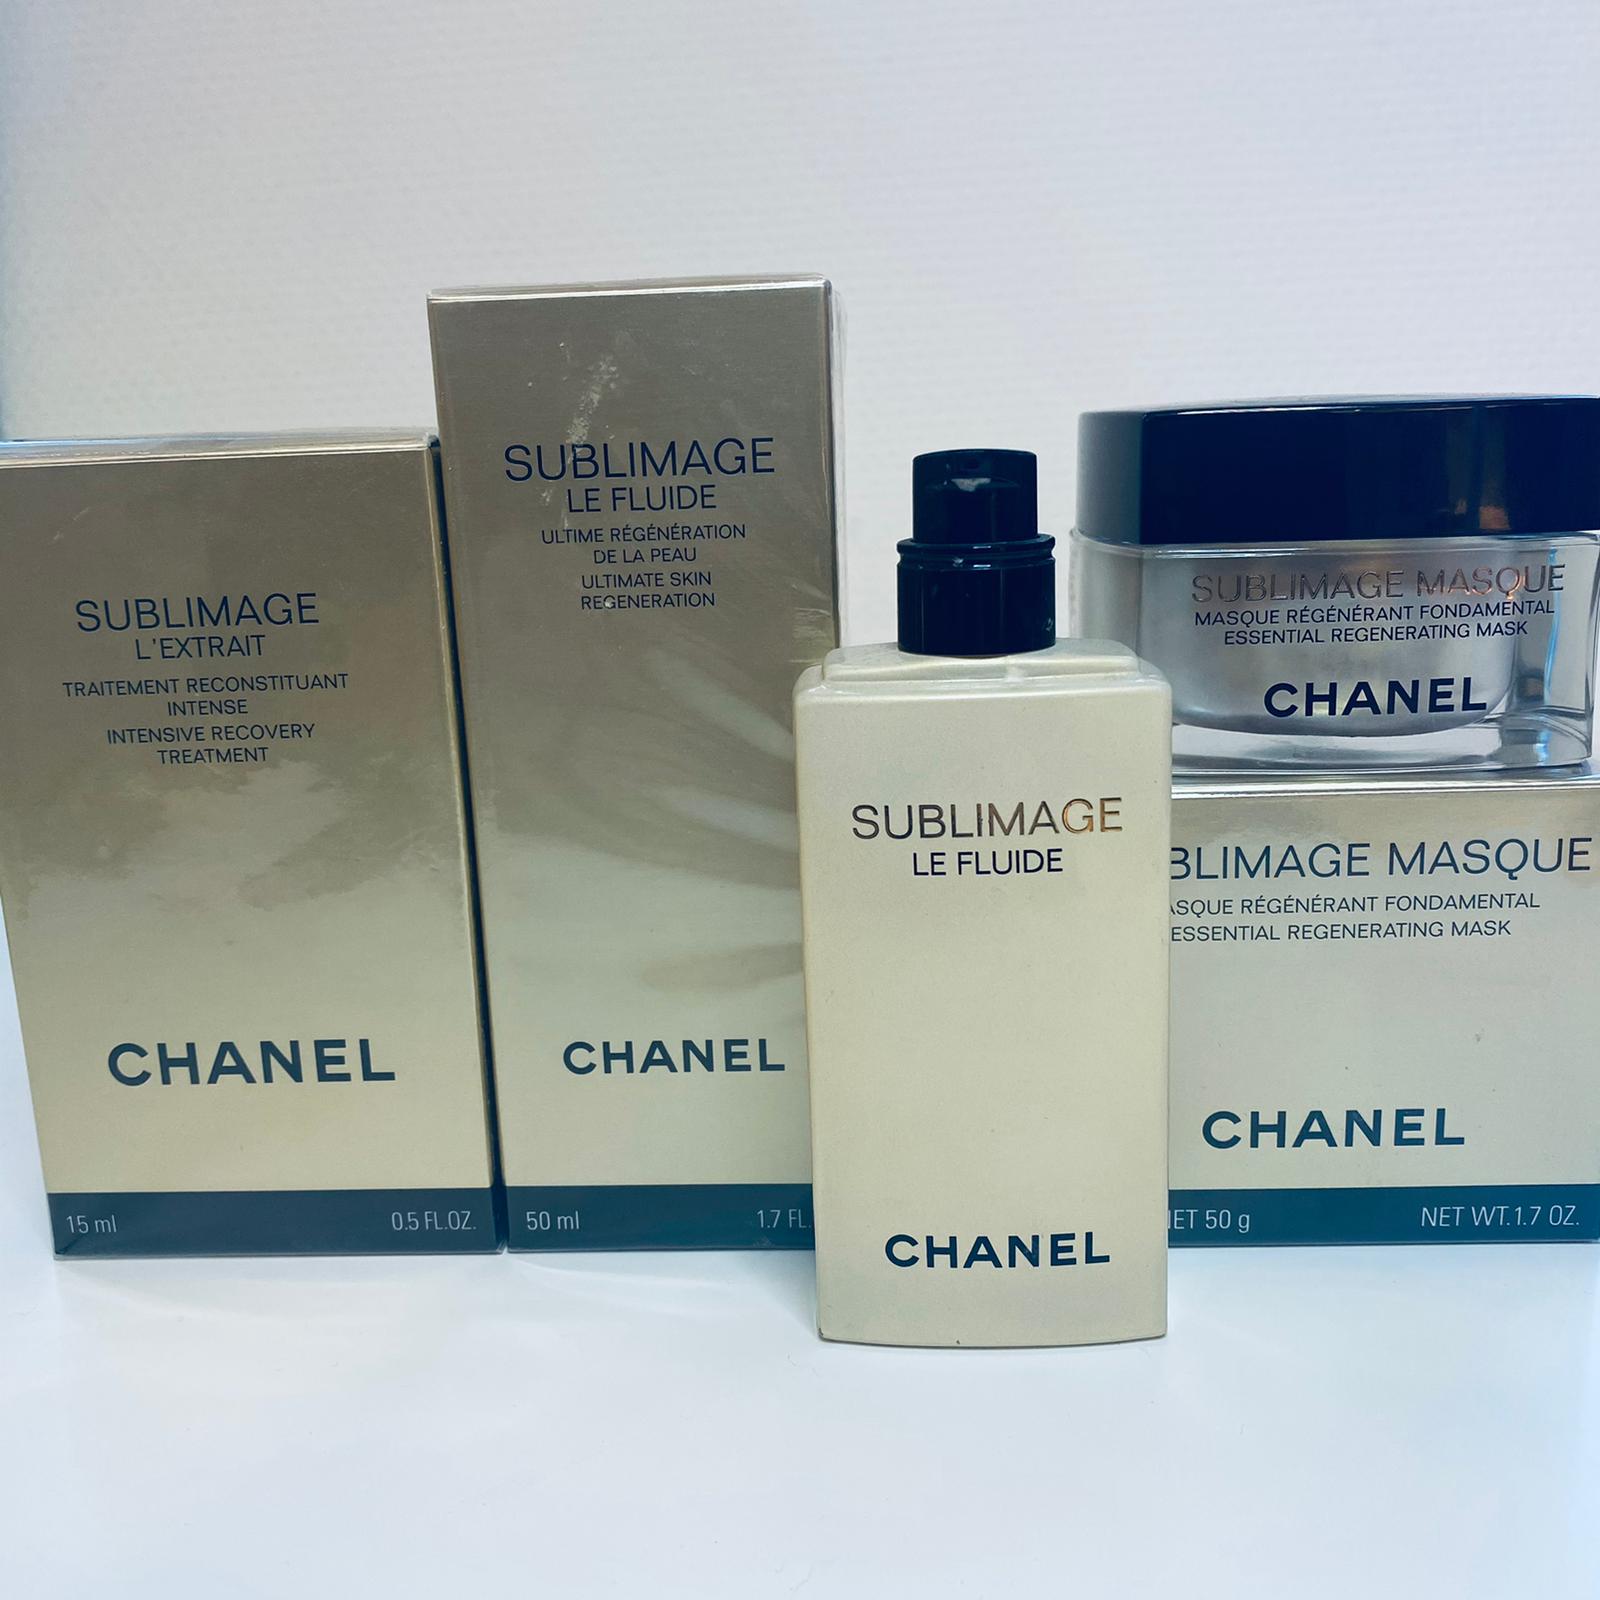 Chanel sublimage L'extrait intensive recovery treatment 15 ml